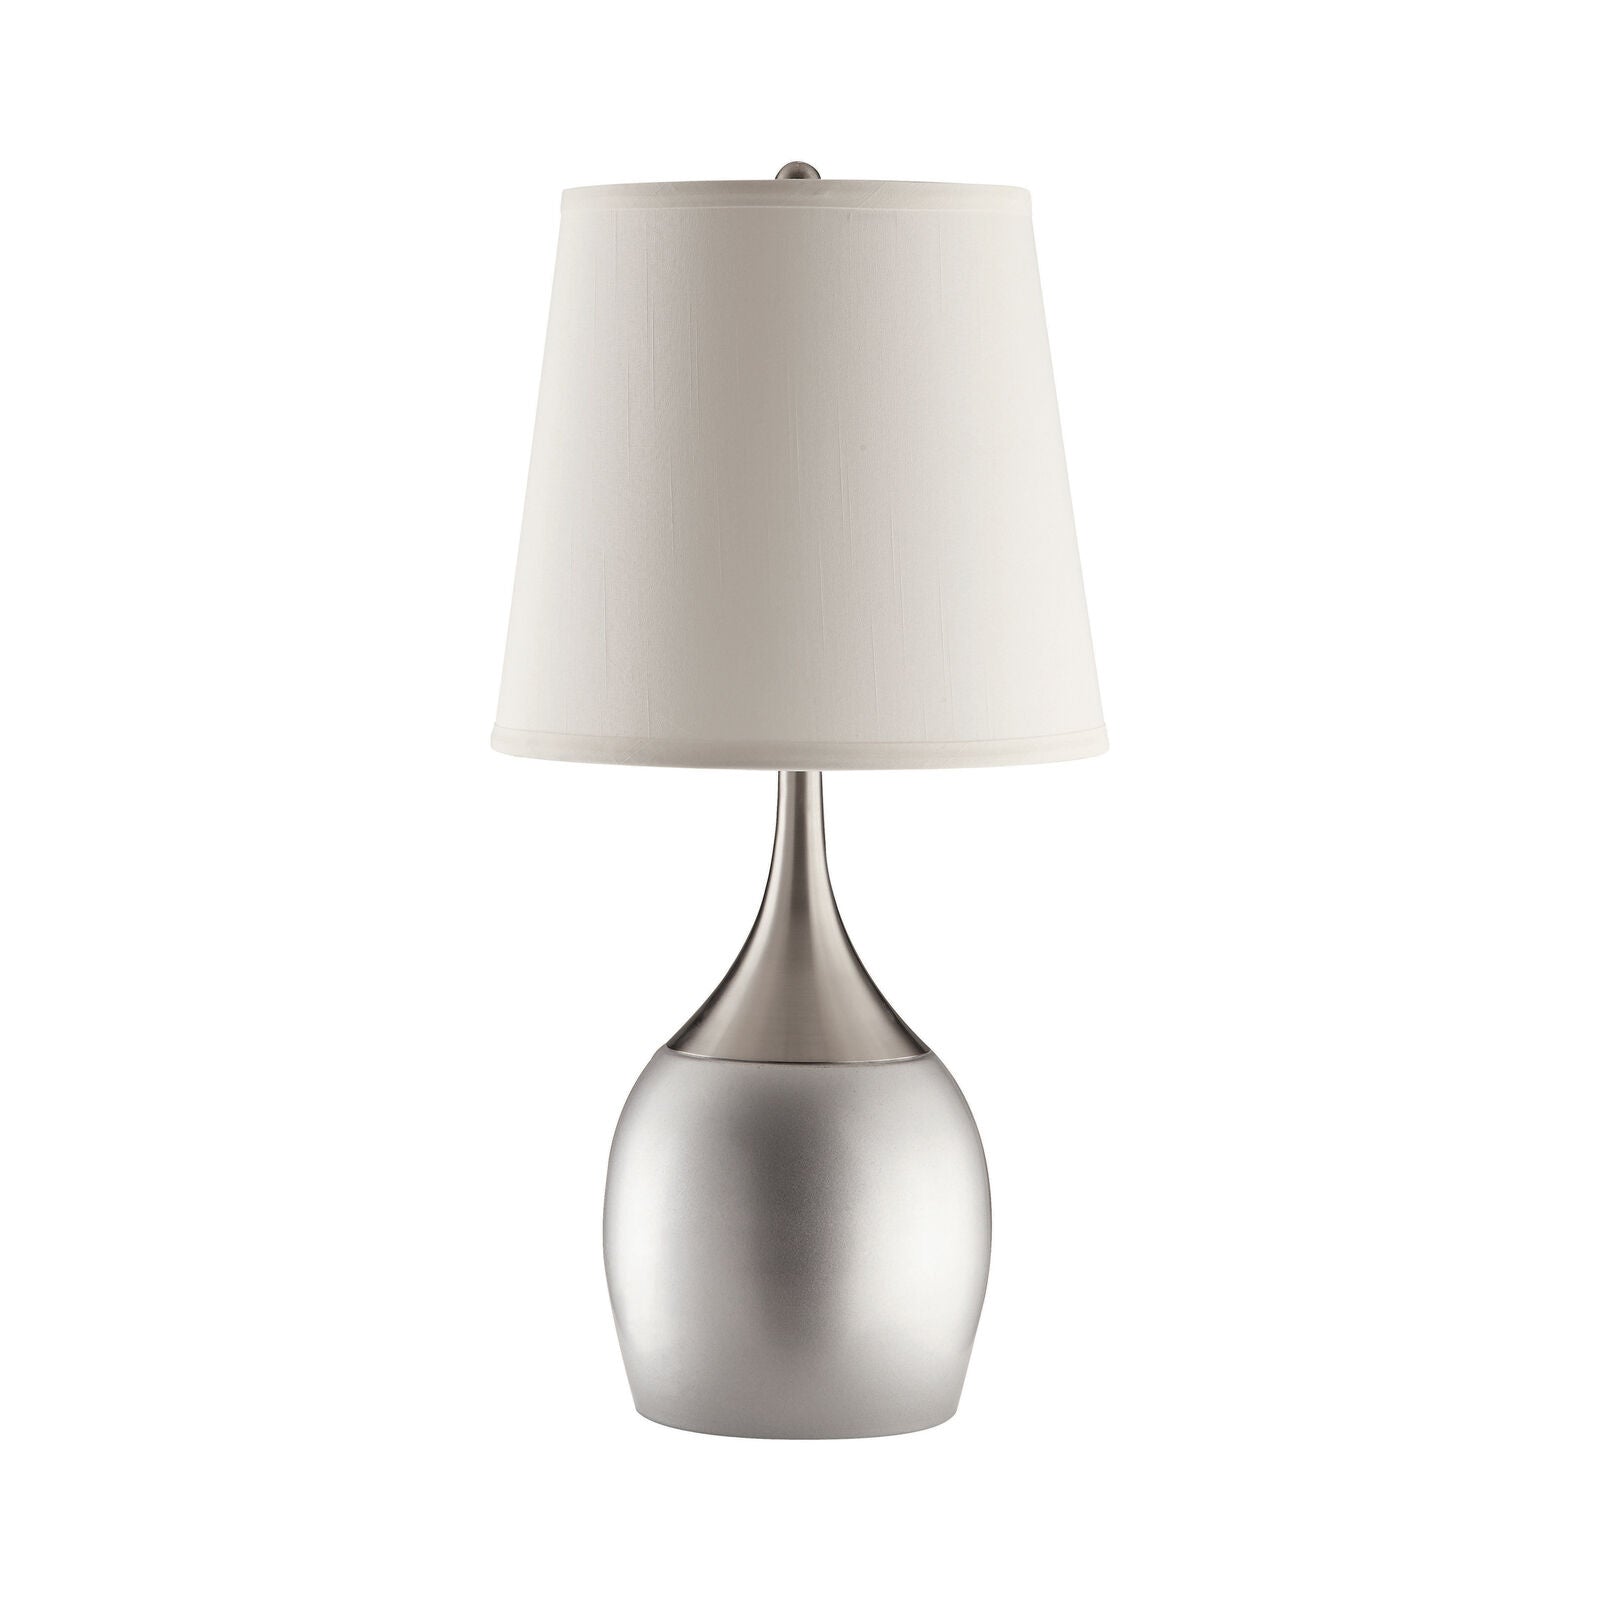 Empire Teardrop Shade Table Lamps Silver and Chrome (Set of 2)